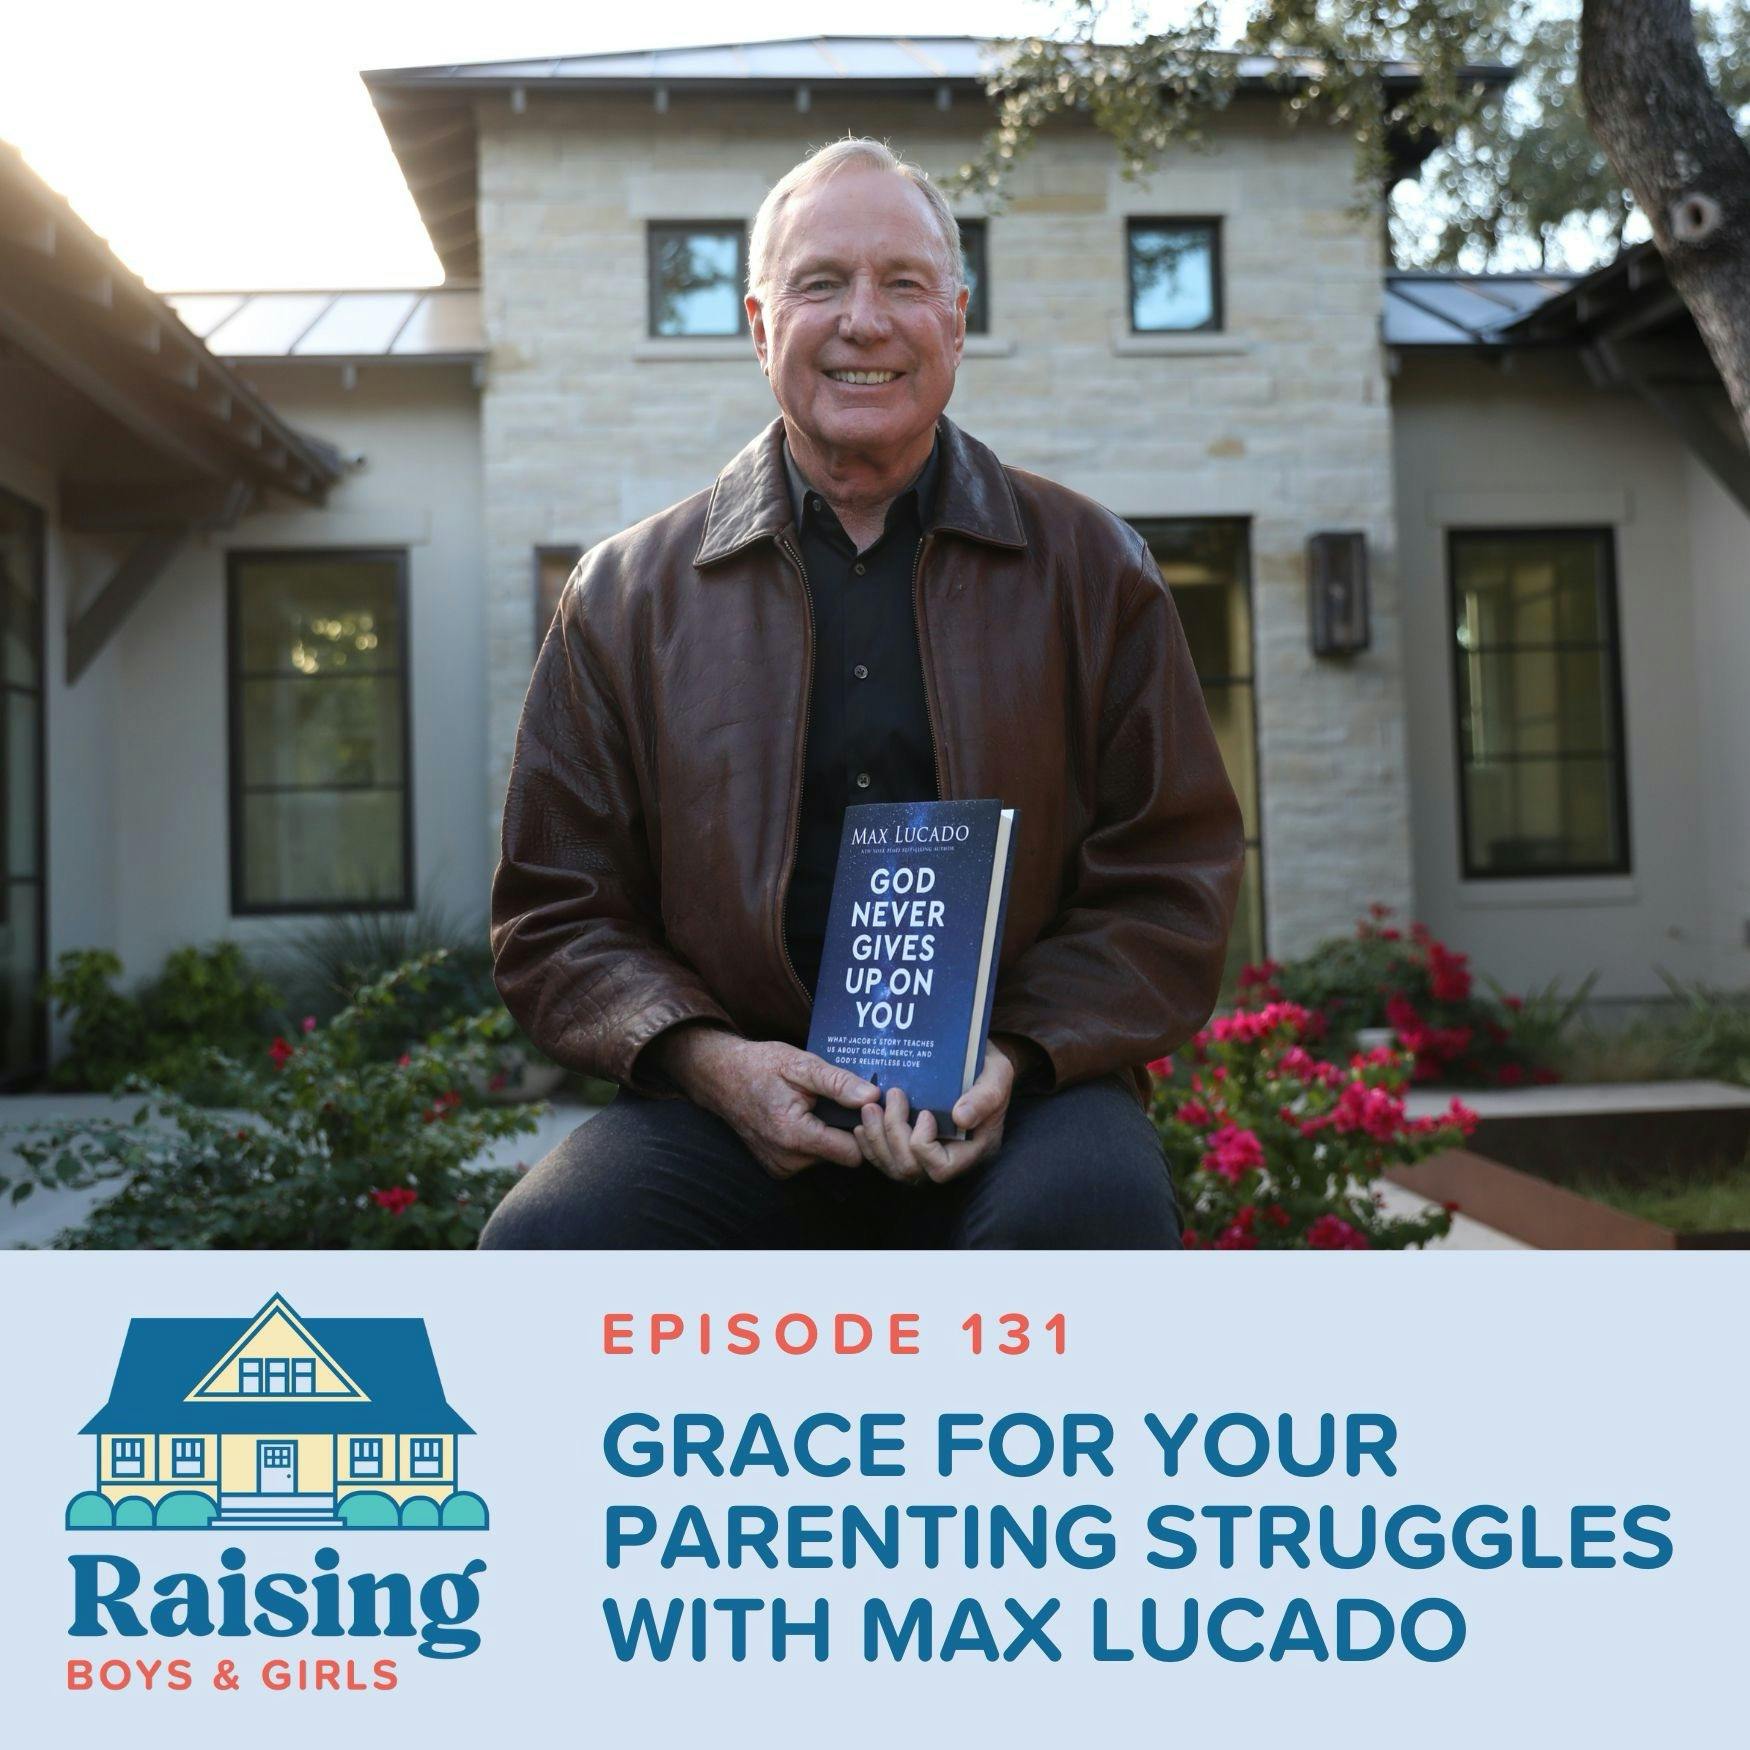 Episode 131: Grace for Your Parenting Struggles with Max Lucado